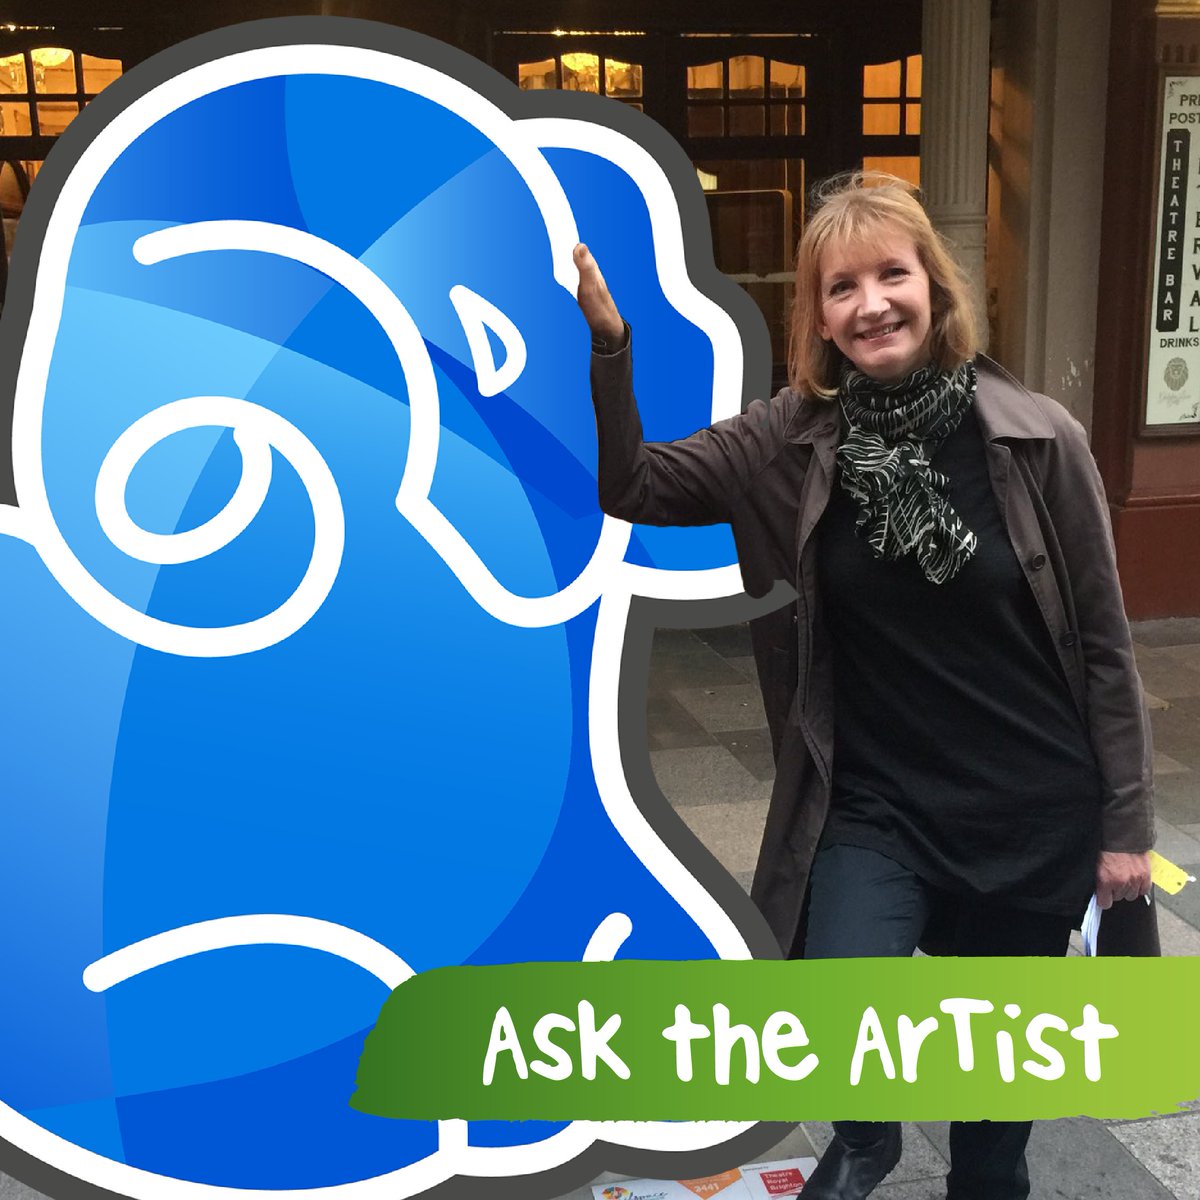 👩‍🎨Ask the #Artist 👩‍🎨

Curious about Rameses?
Life as an artist?
The process and inspiration?

Ask @JudithBerrill your questions below 👇

#AskTheArtist #WildInArt #DerbyRamTrail